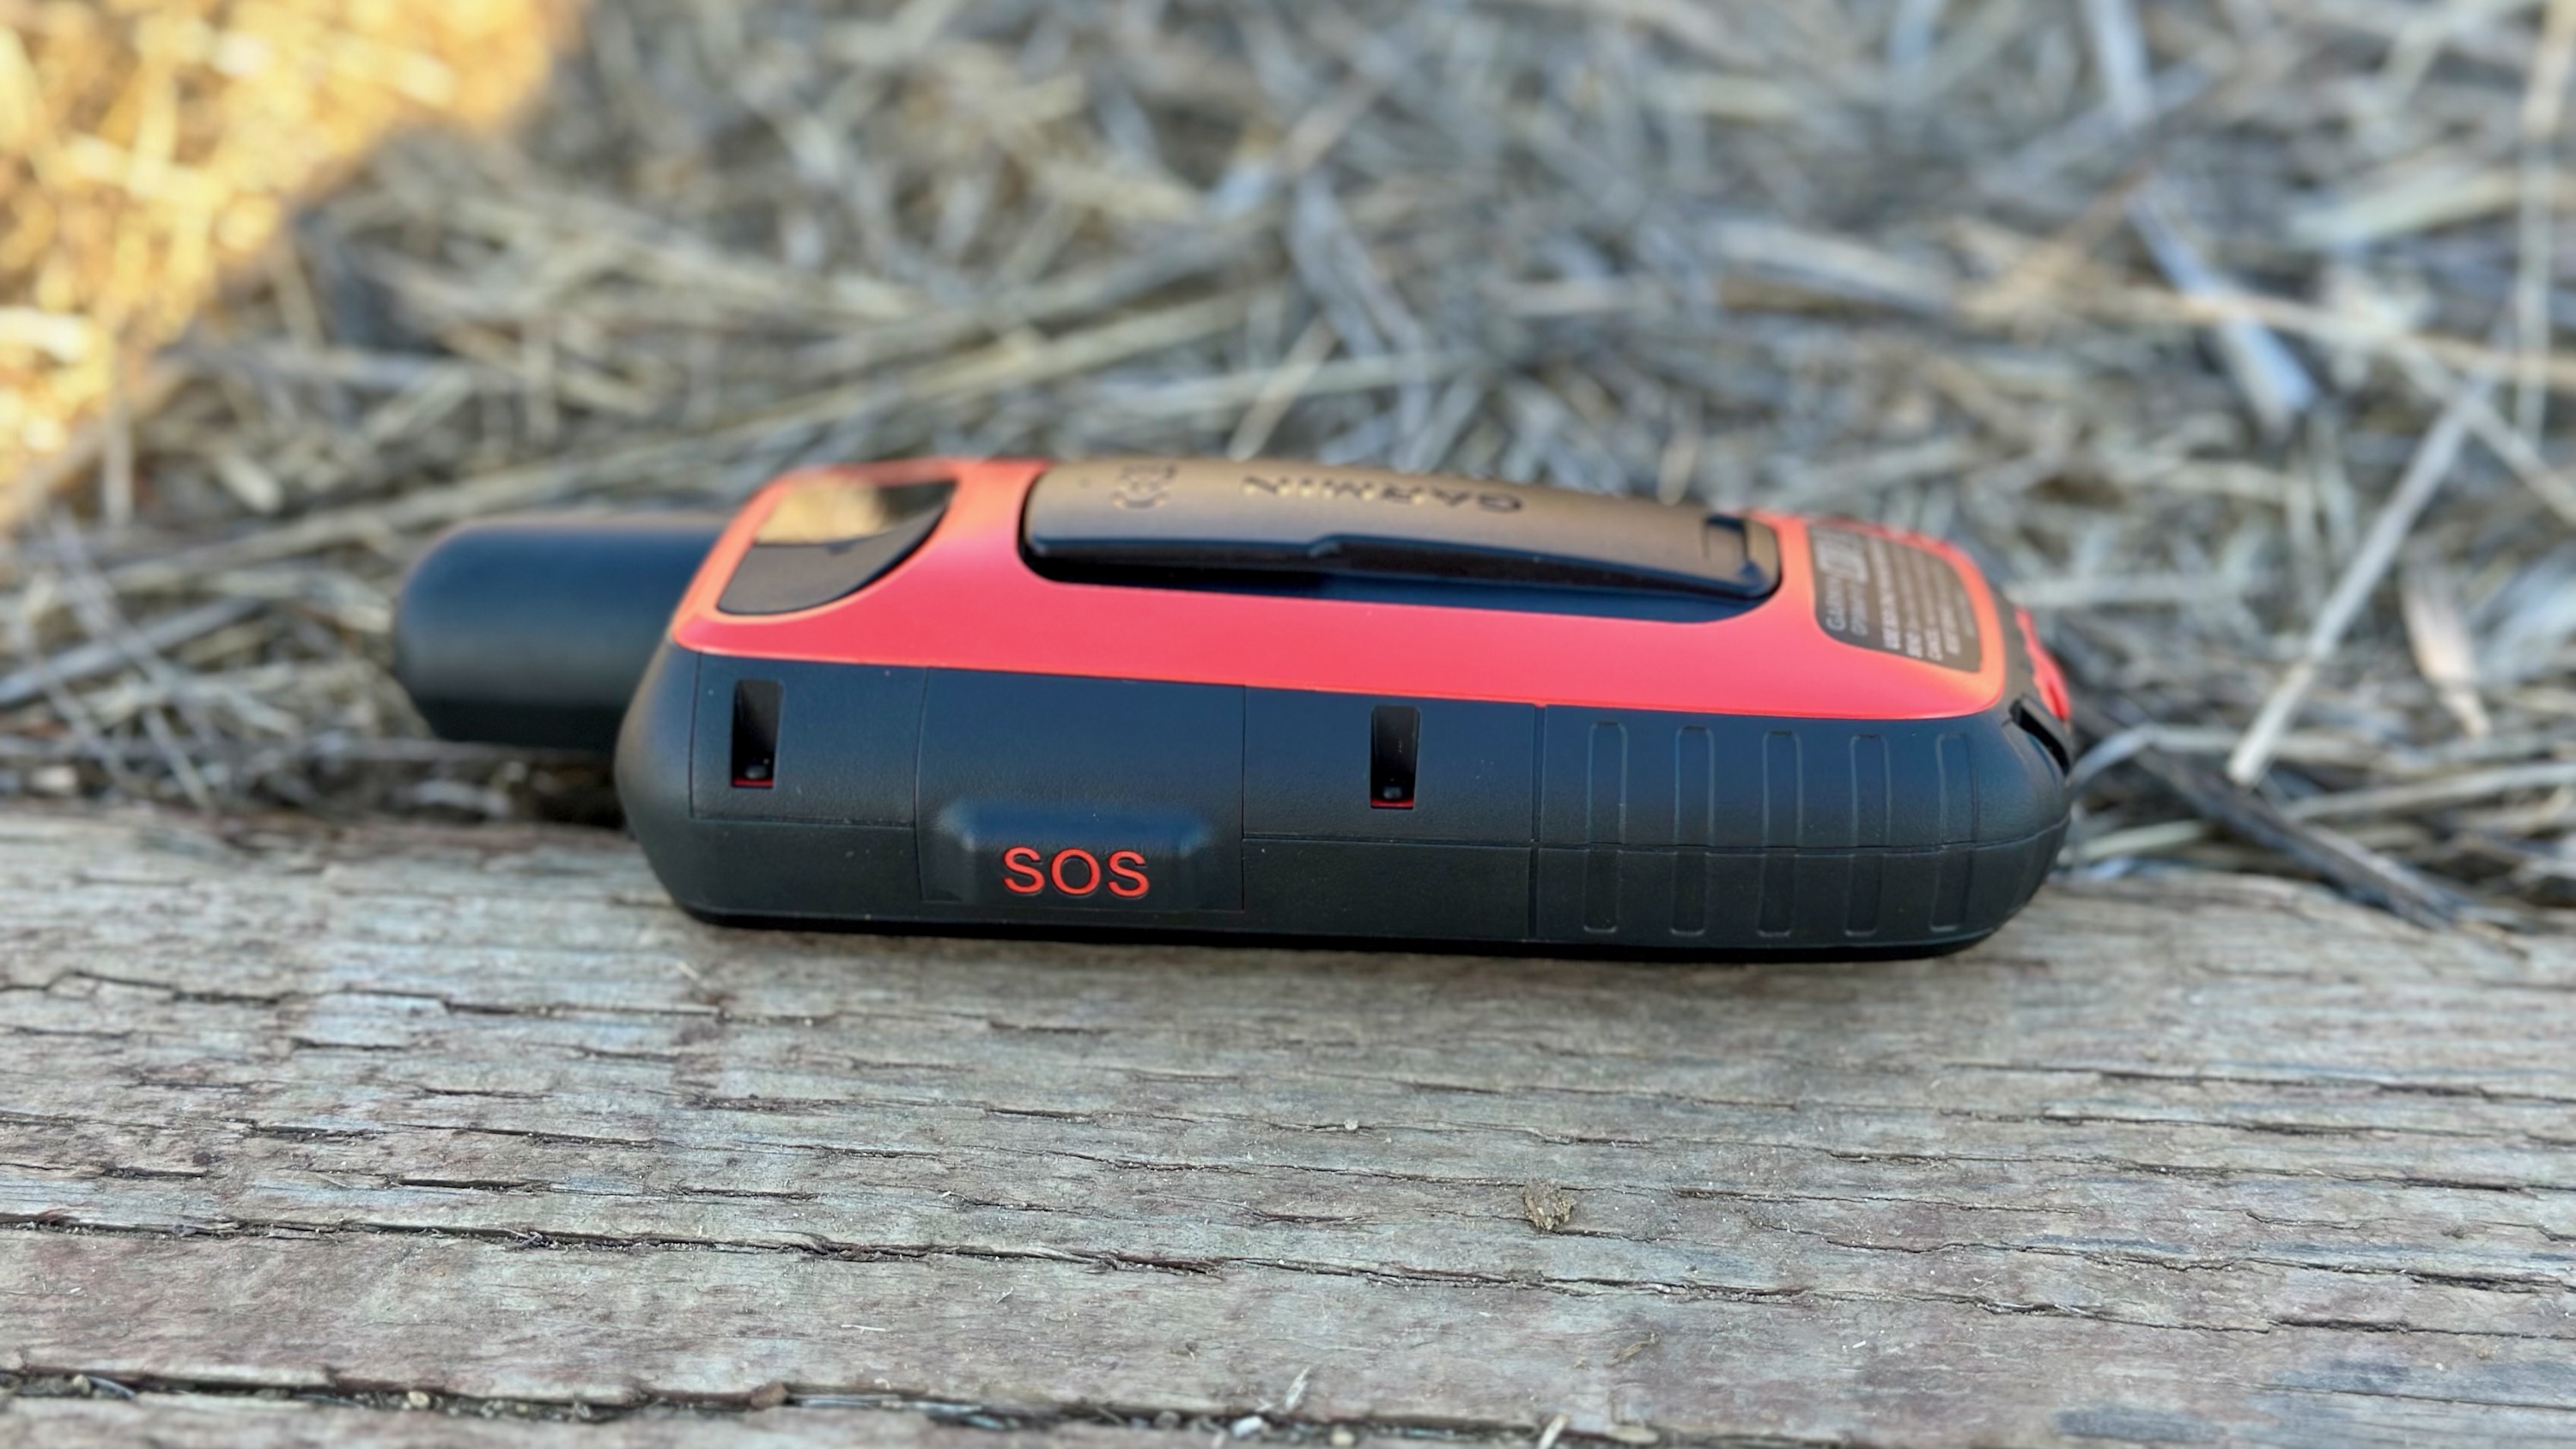 A side view of the Garmin GPSMAP 67i showing the SOS button cover